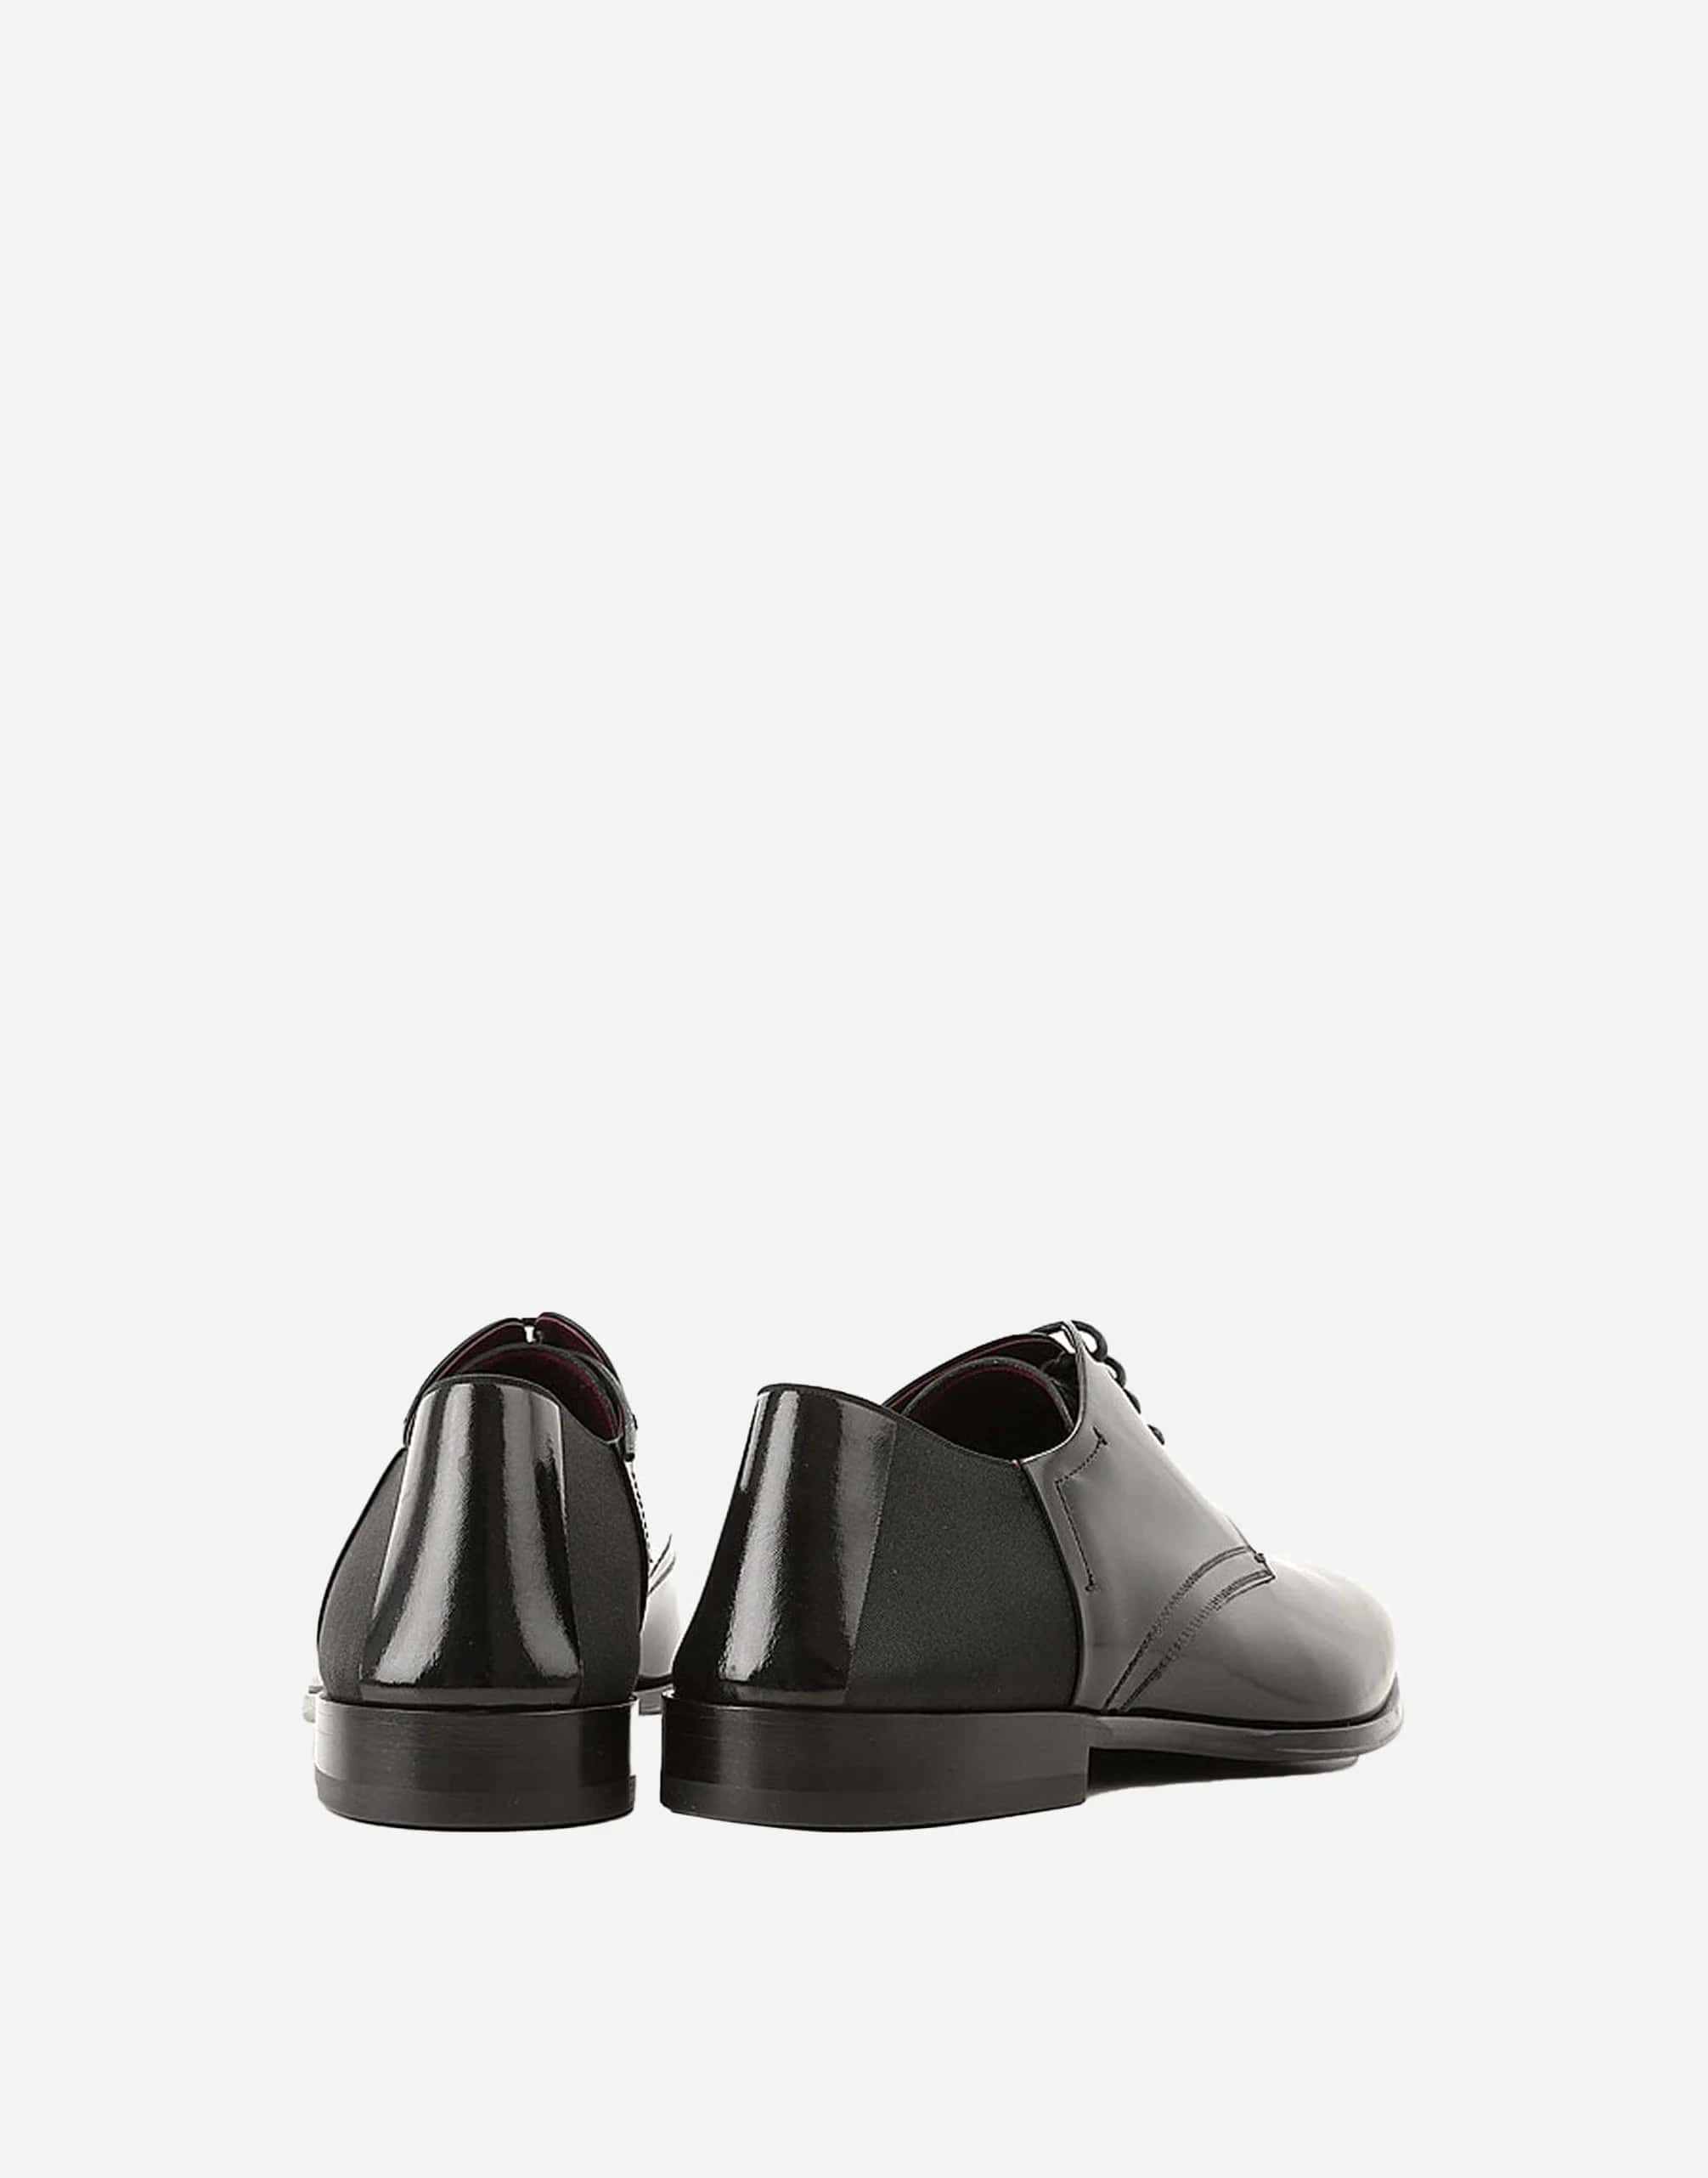 Dolce & Gabbana Stretch Patent Derby Shoes